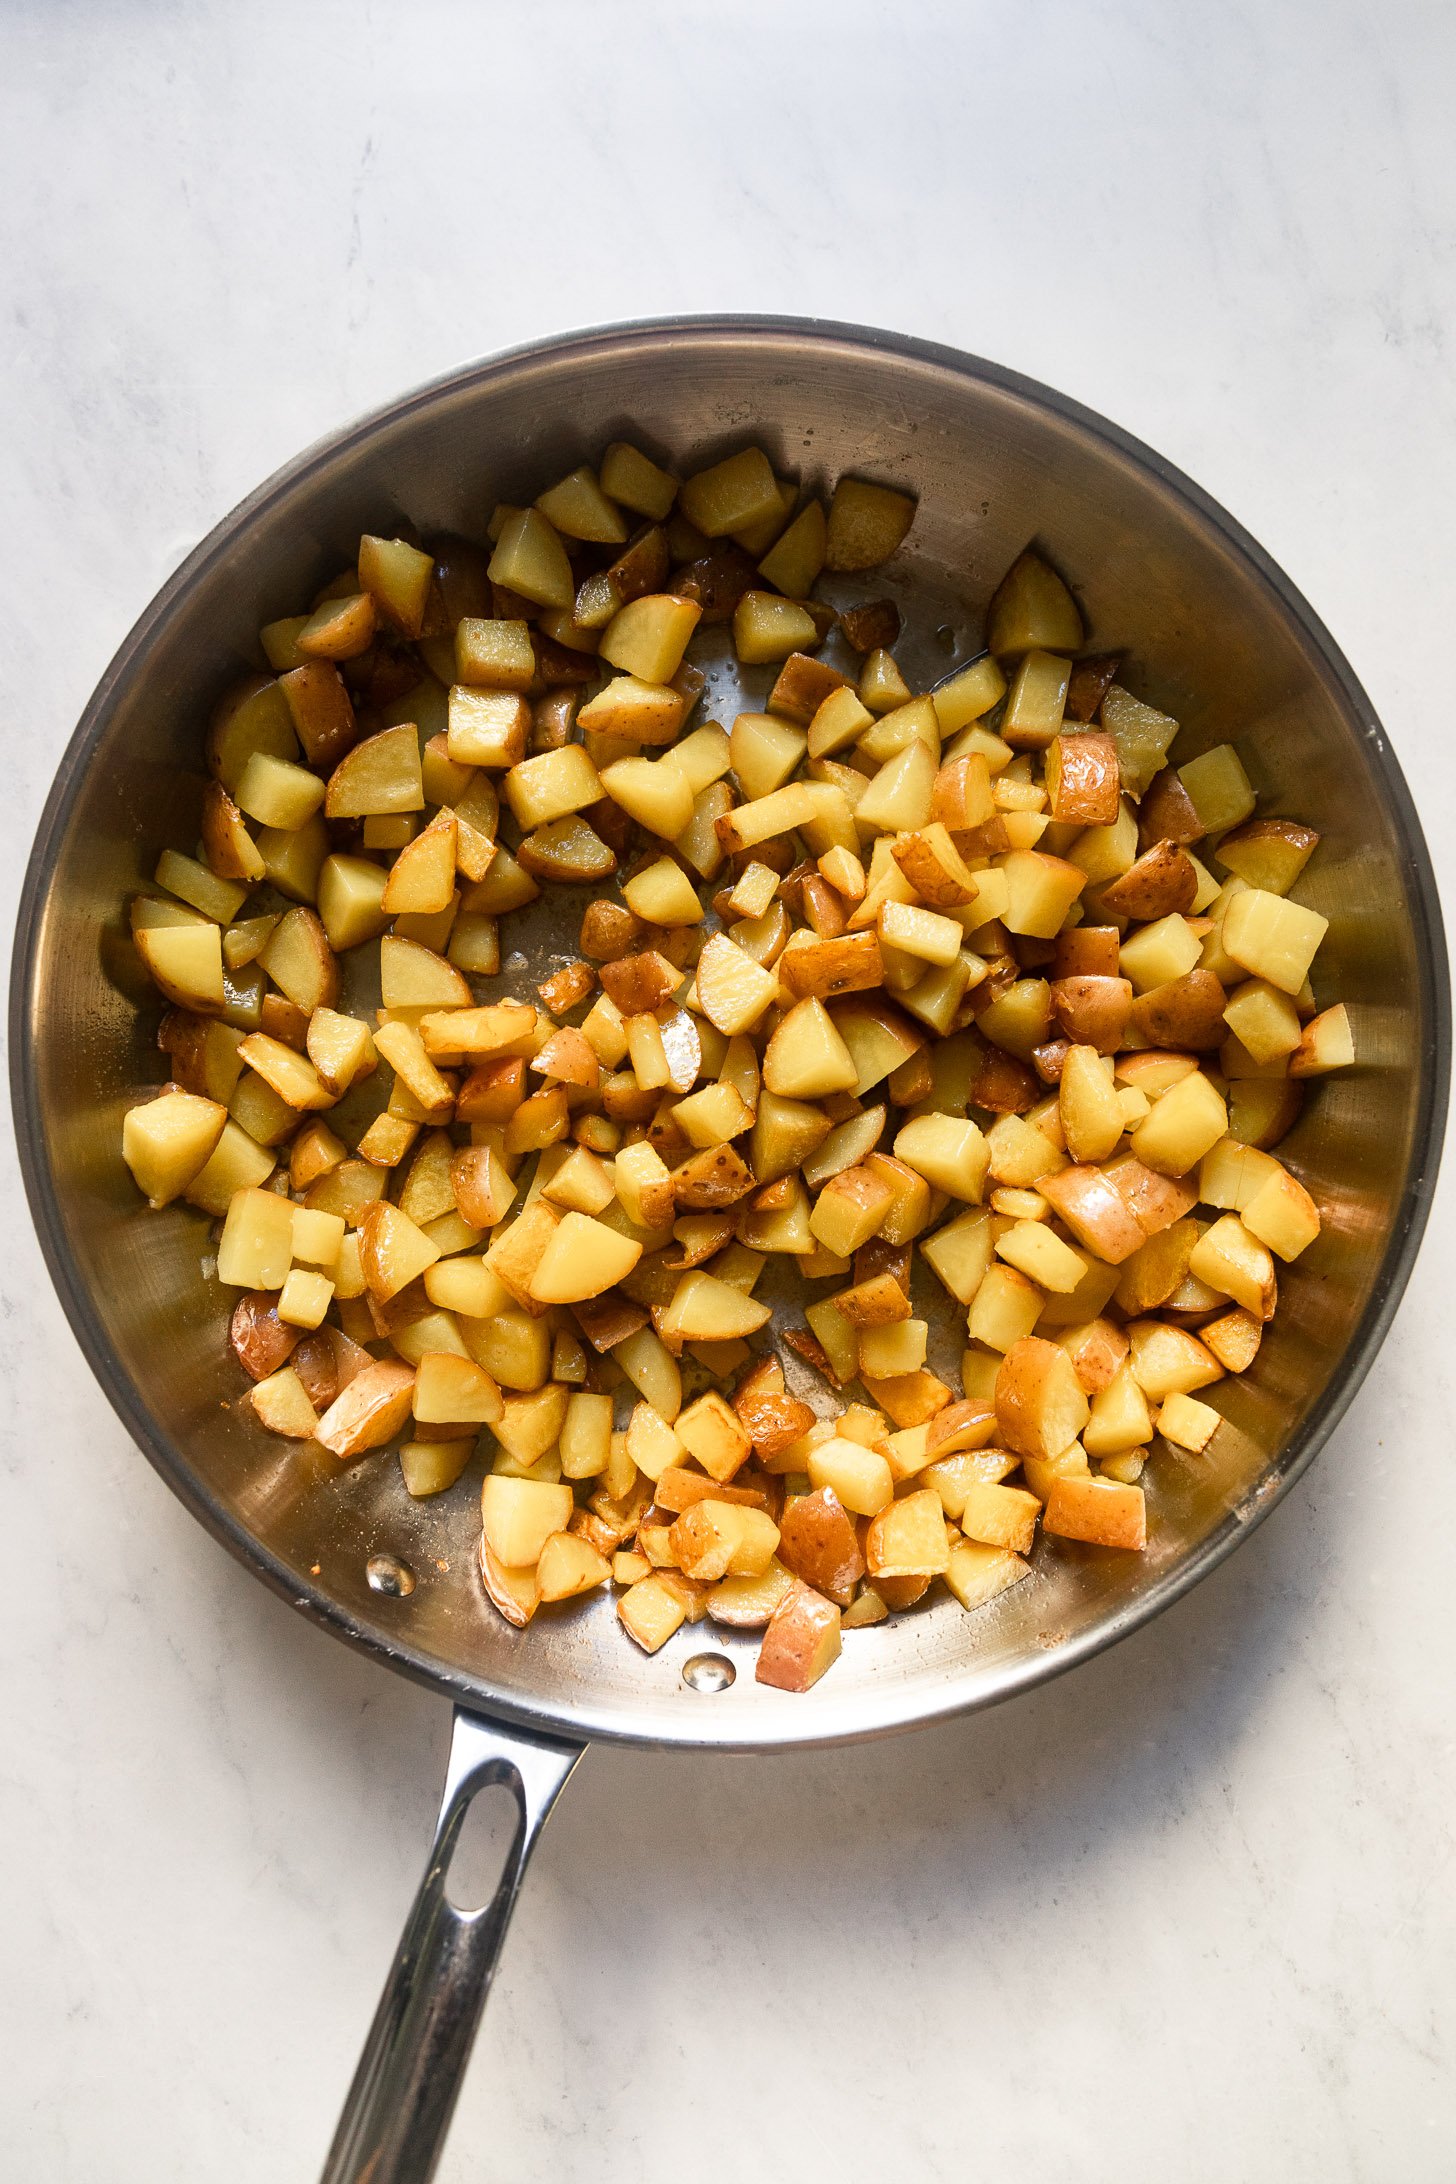 Diced potatoes in skillet.